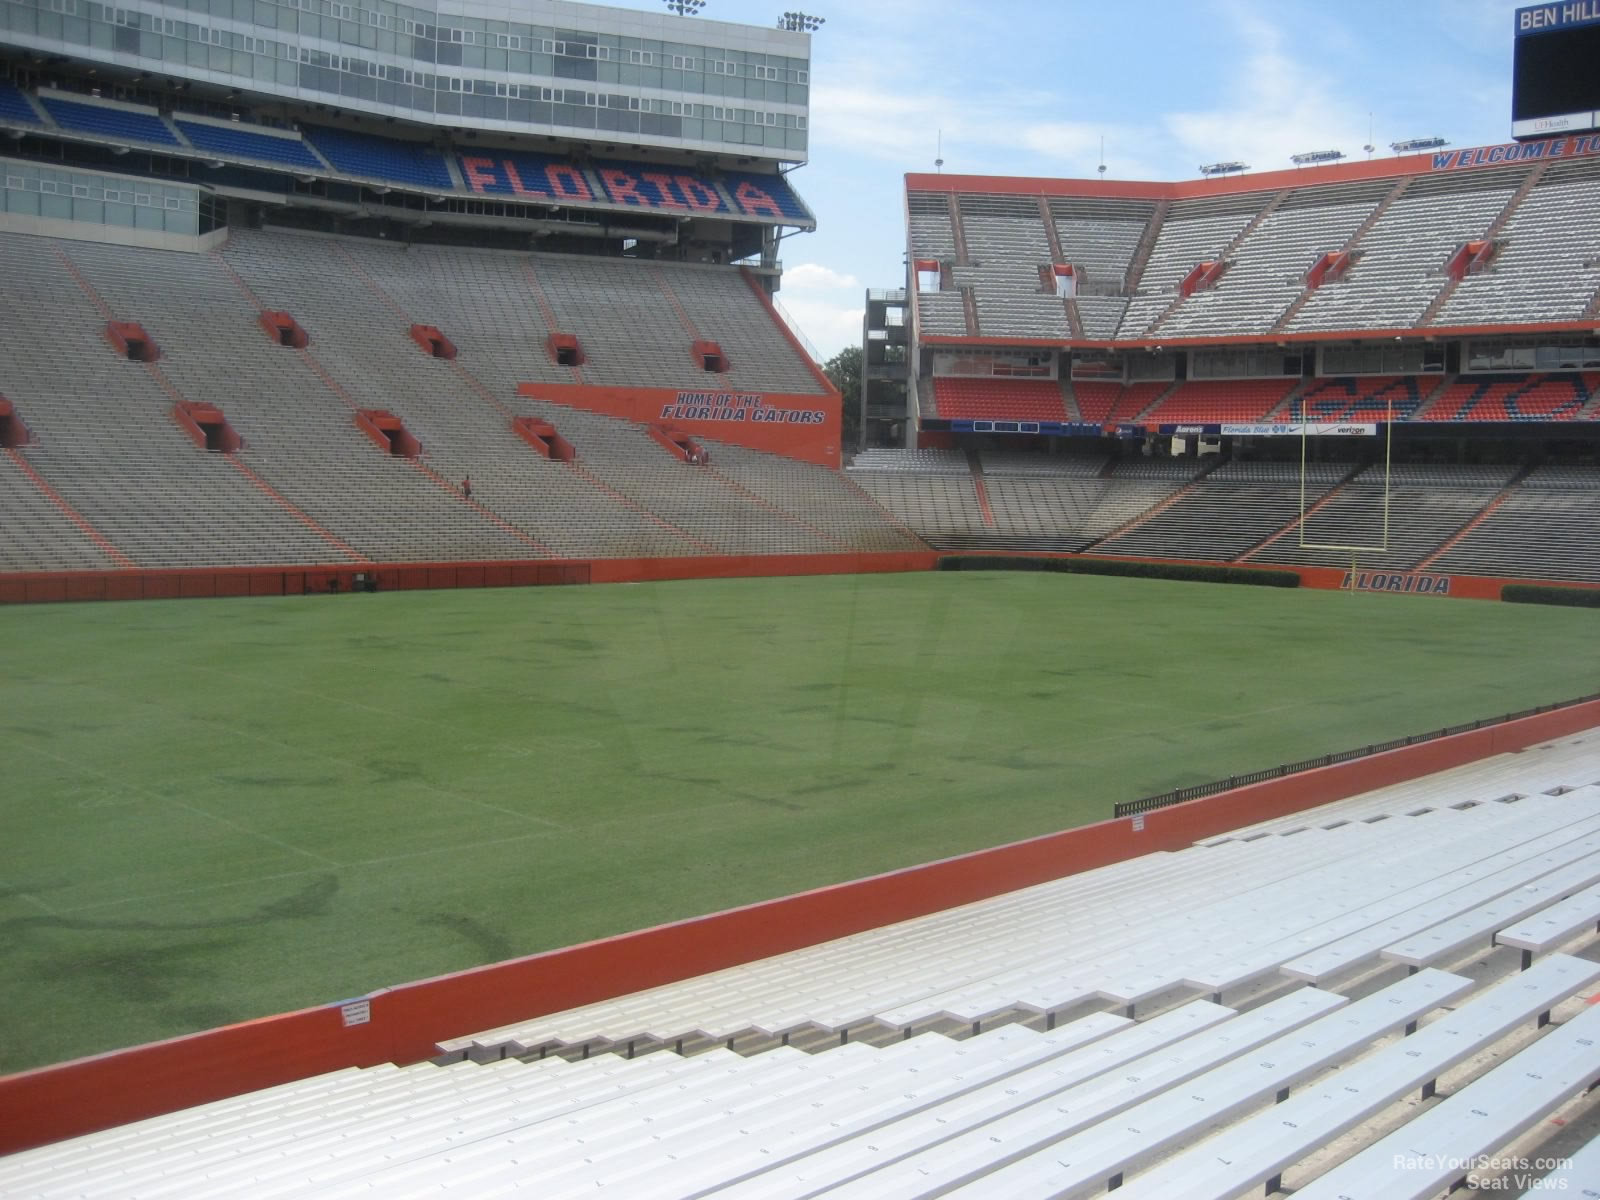 section 42, row 22 seat view  - ben hill griffin stadium